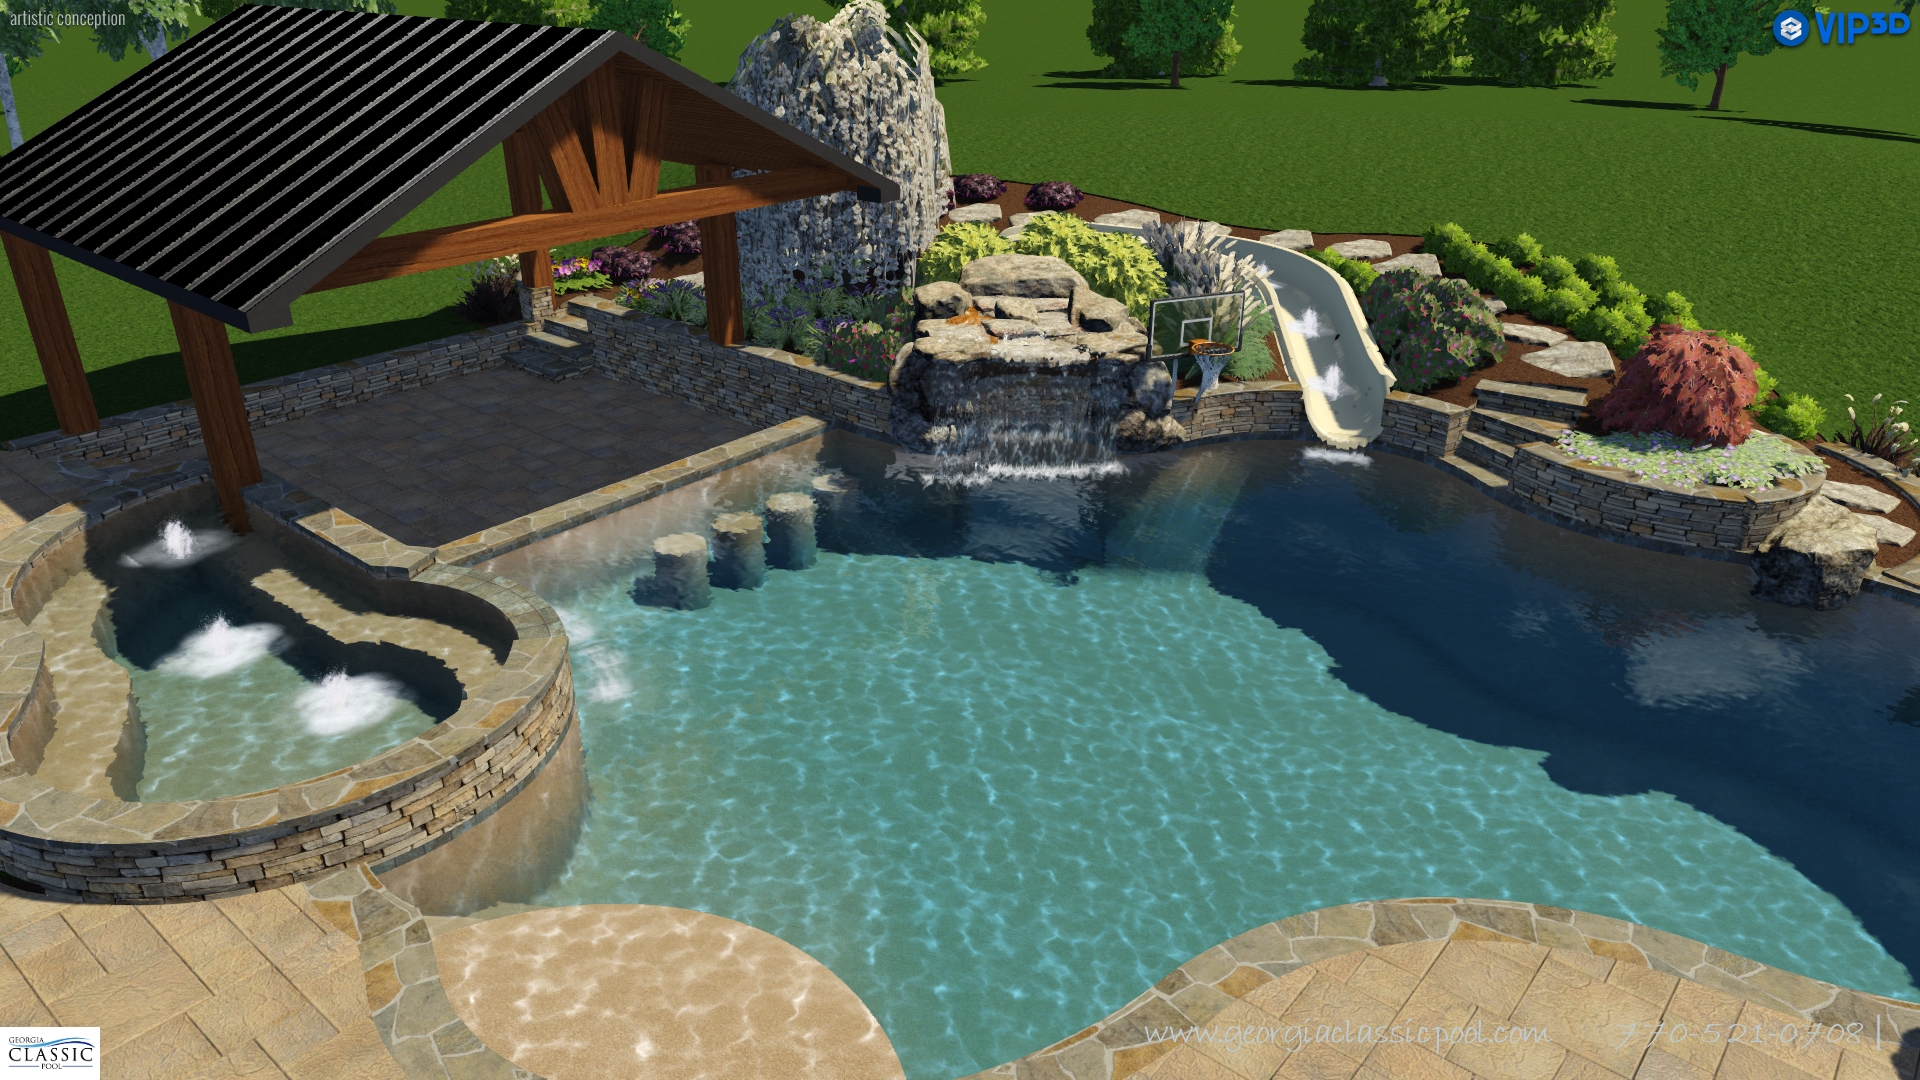 A 3D rendering of a modern pool with a unique spa and a sunken cabana nestled nearby.